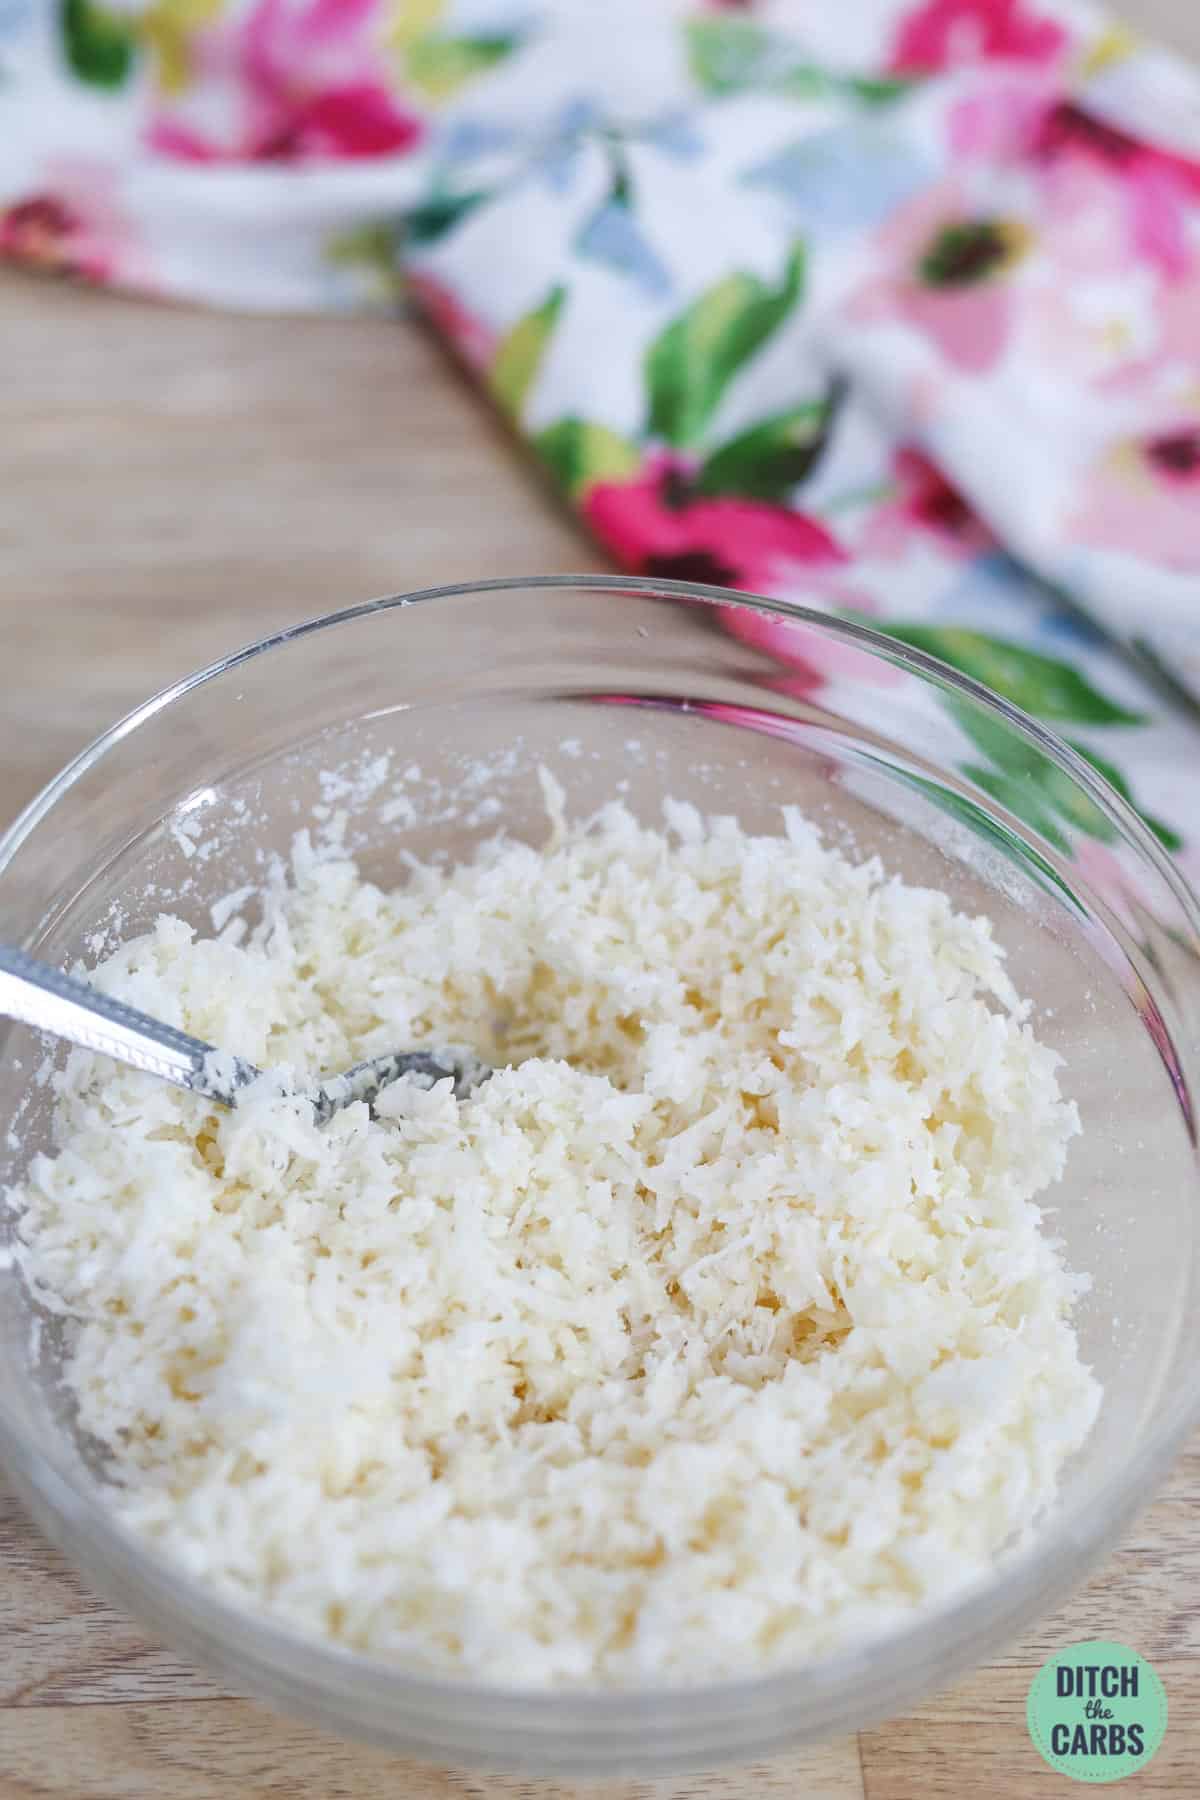 a mixing bowl of desiccated coconut and coconut oil